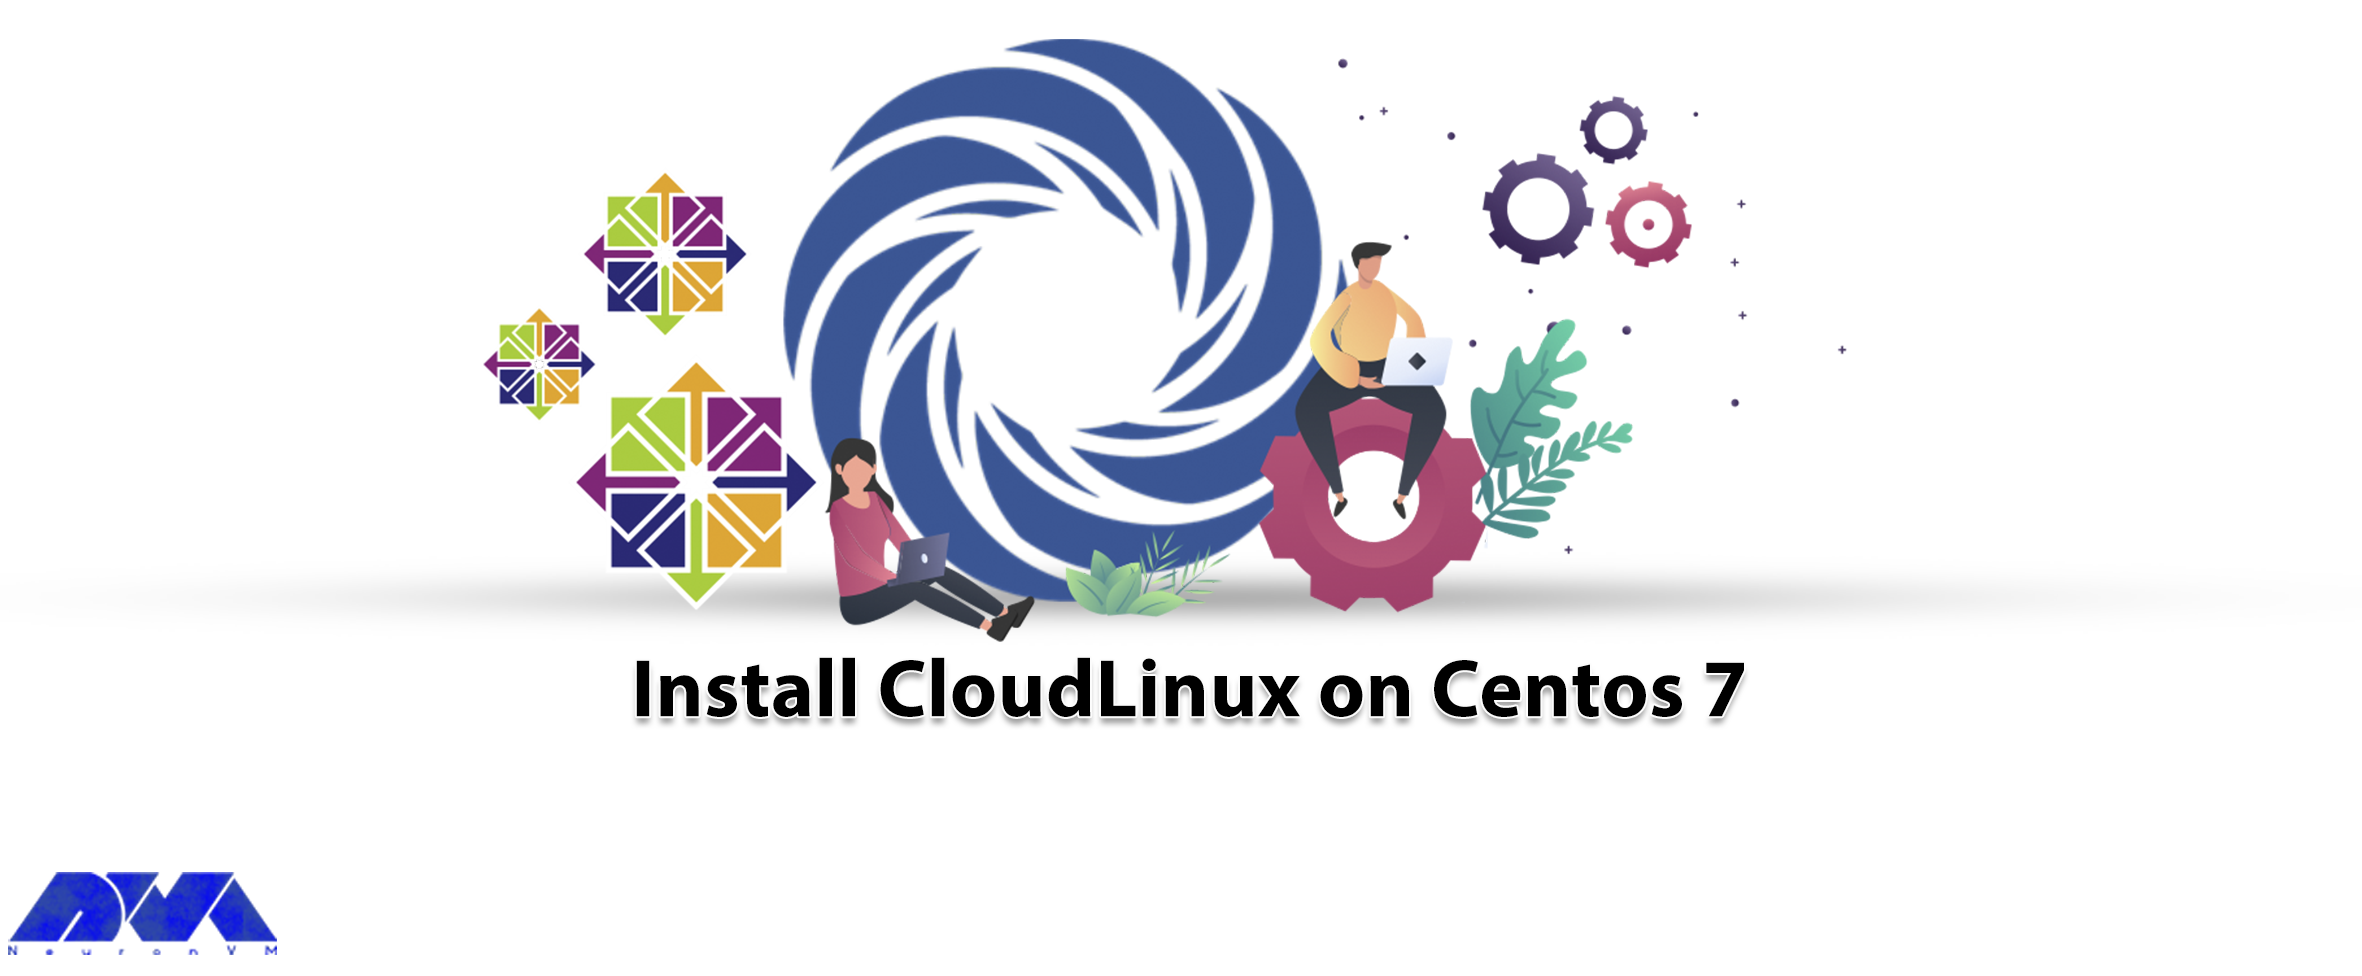 Install CloudLinux on Centos 7